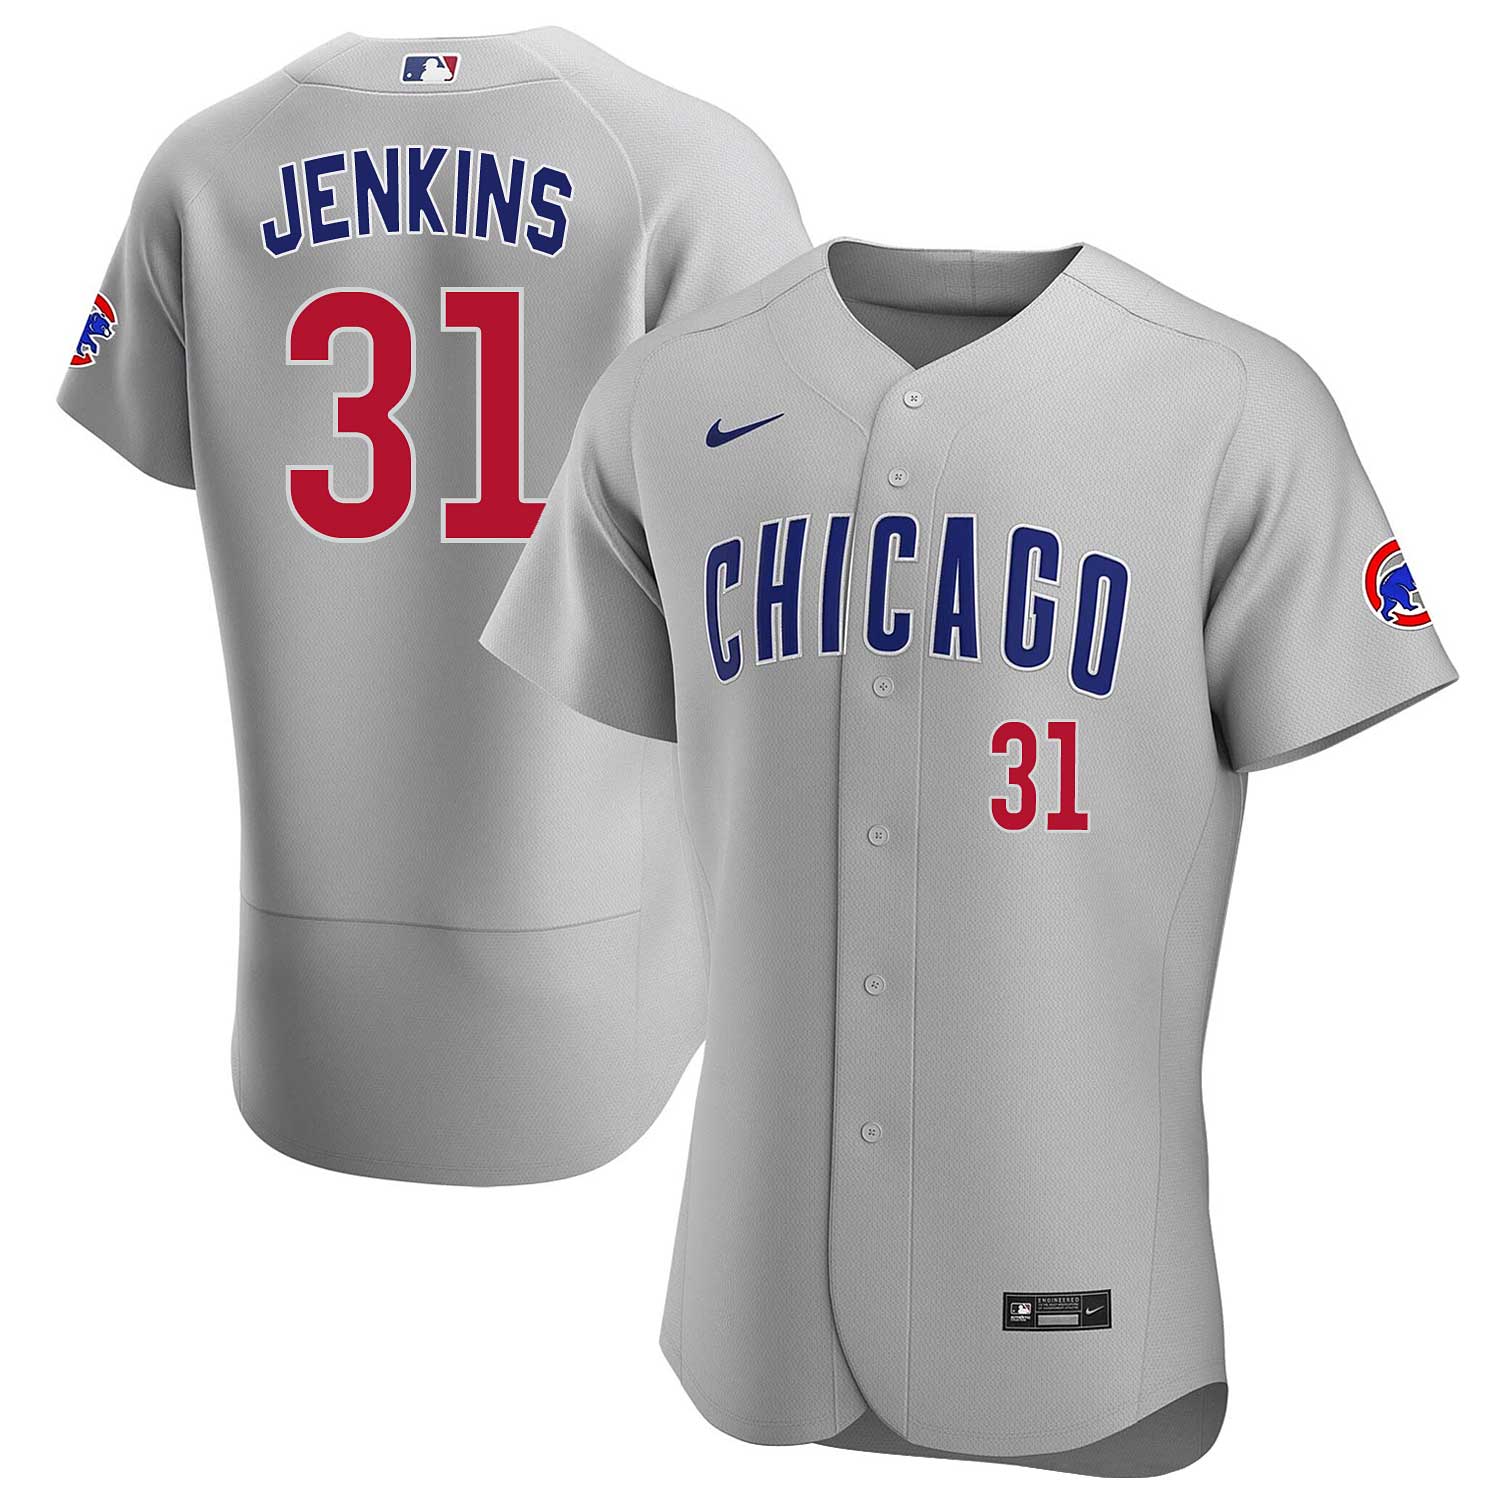 Chicago Cubs Fergie Jenkins Nike Road Authentic Jersey 44 = Medium / Large